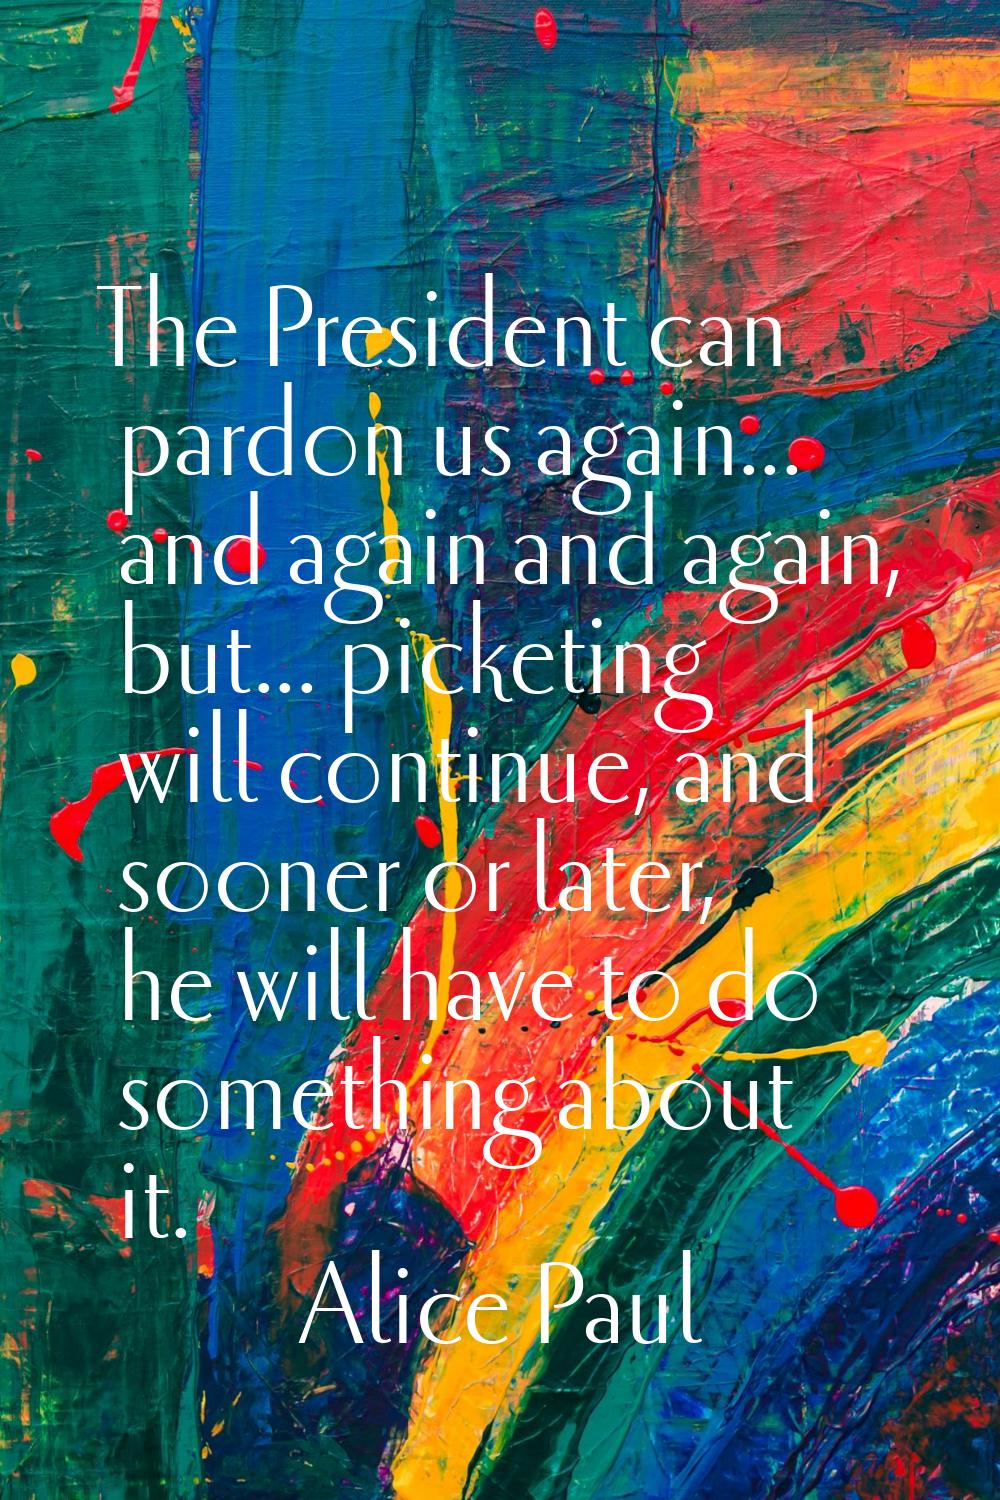 The President can pardon us again... and again and again, but... picketing will continue, and soone